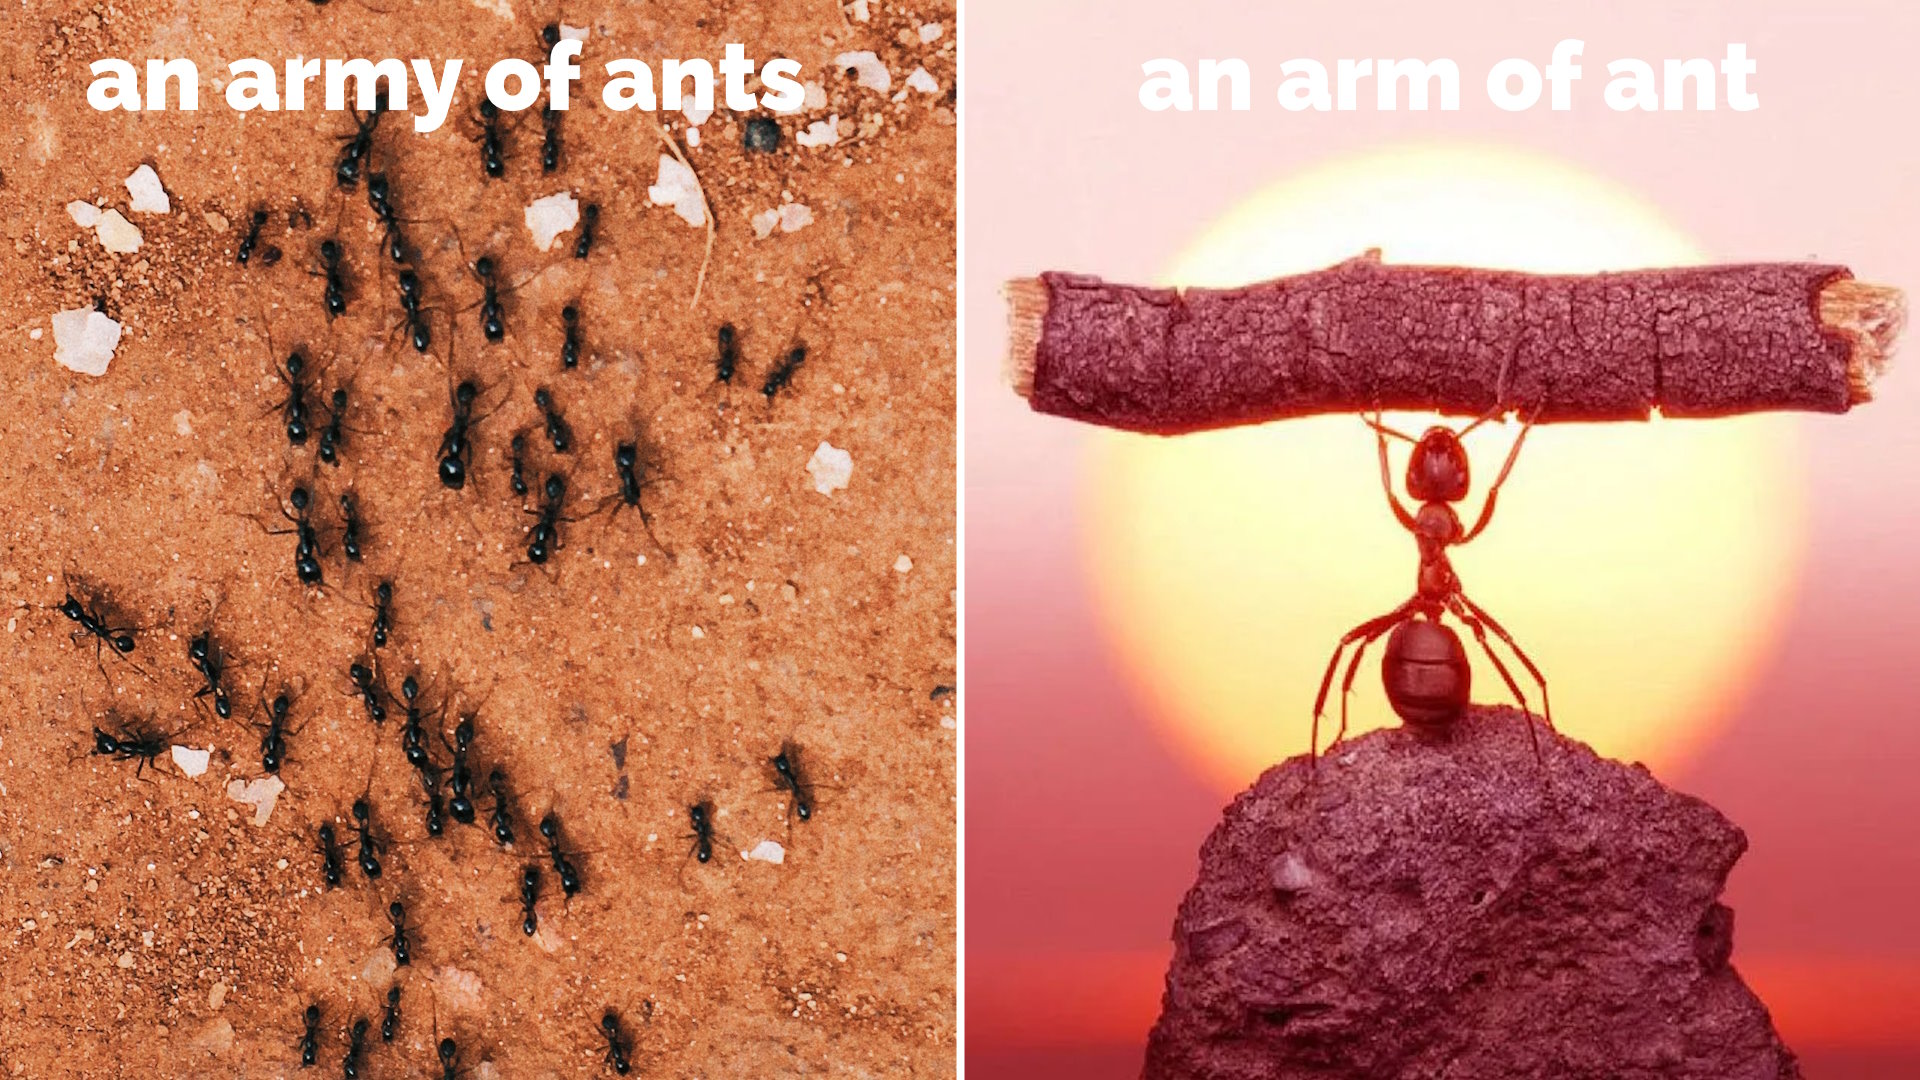 Captioned photos showing "an ARMY of ANTS" and "an ARM of ANT". The latter picture shows an ant lifting a stick many times its size.